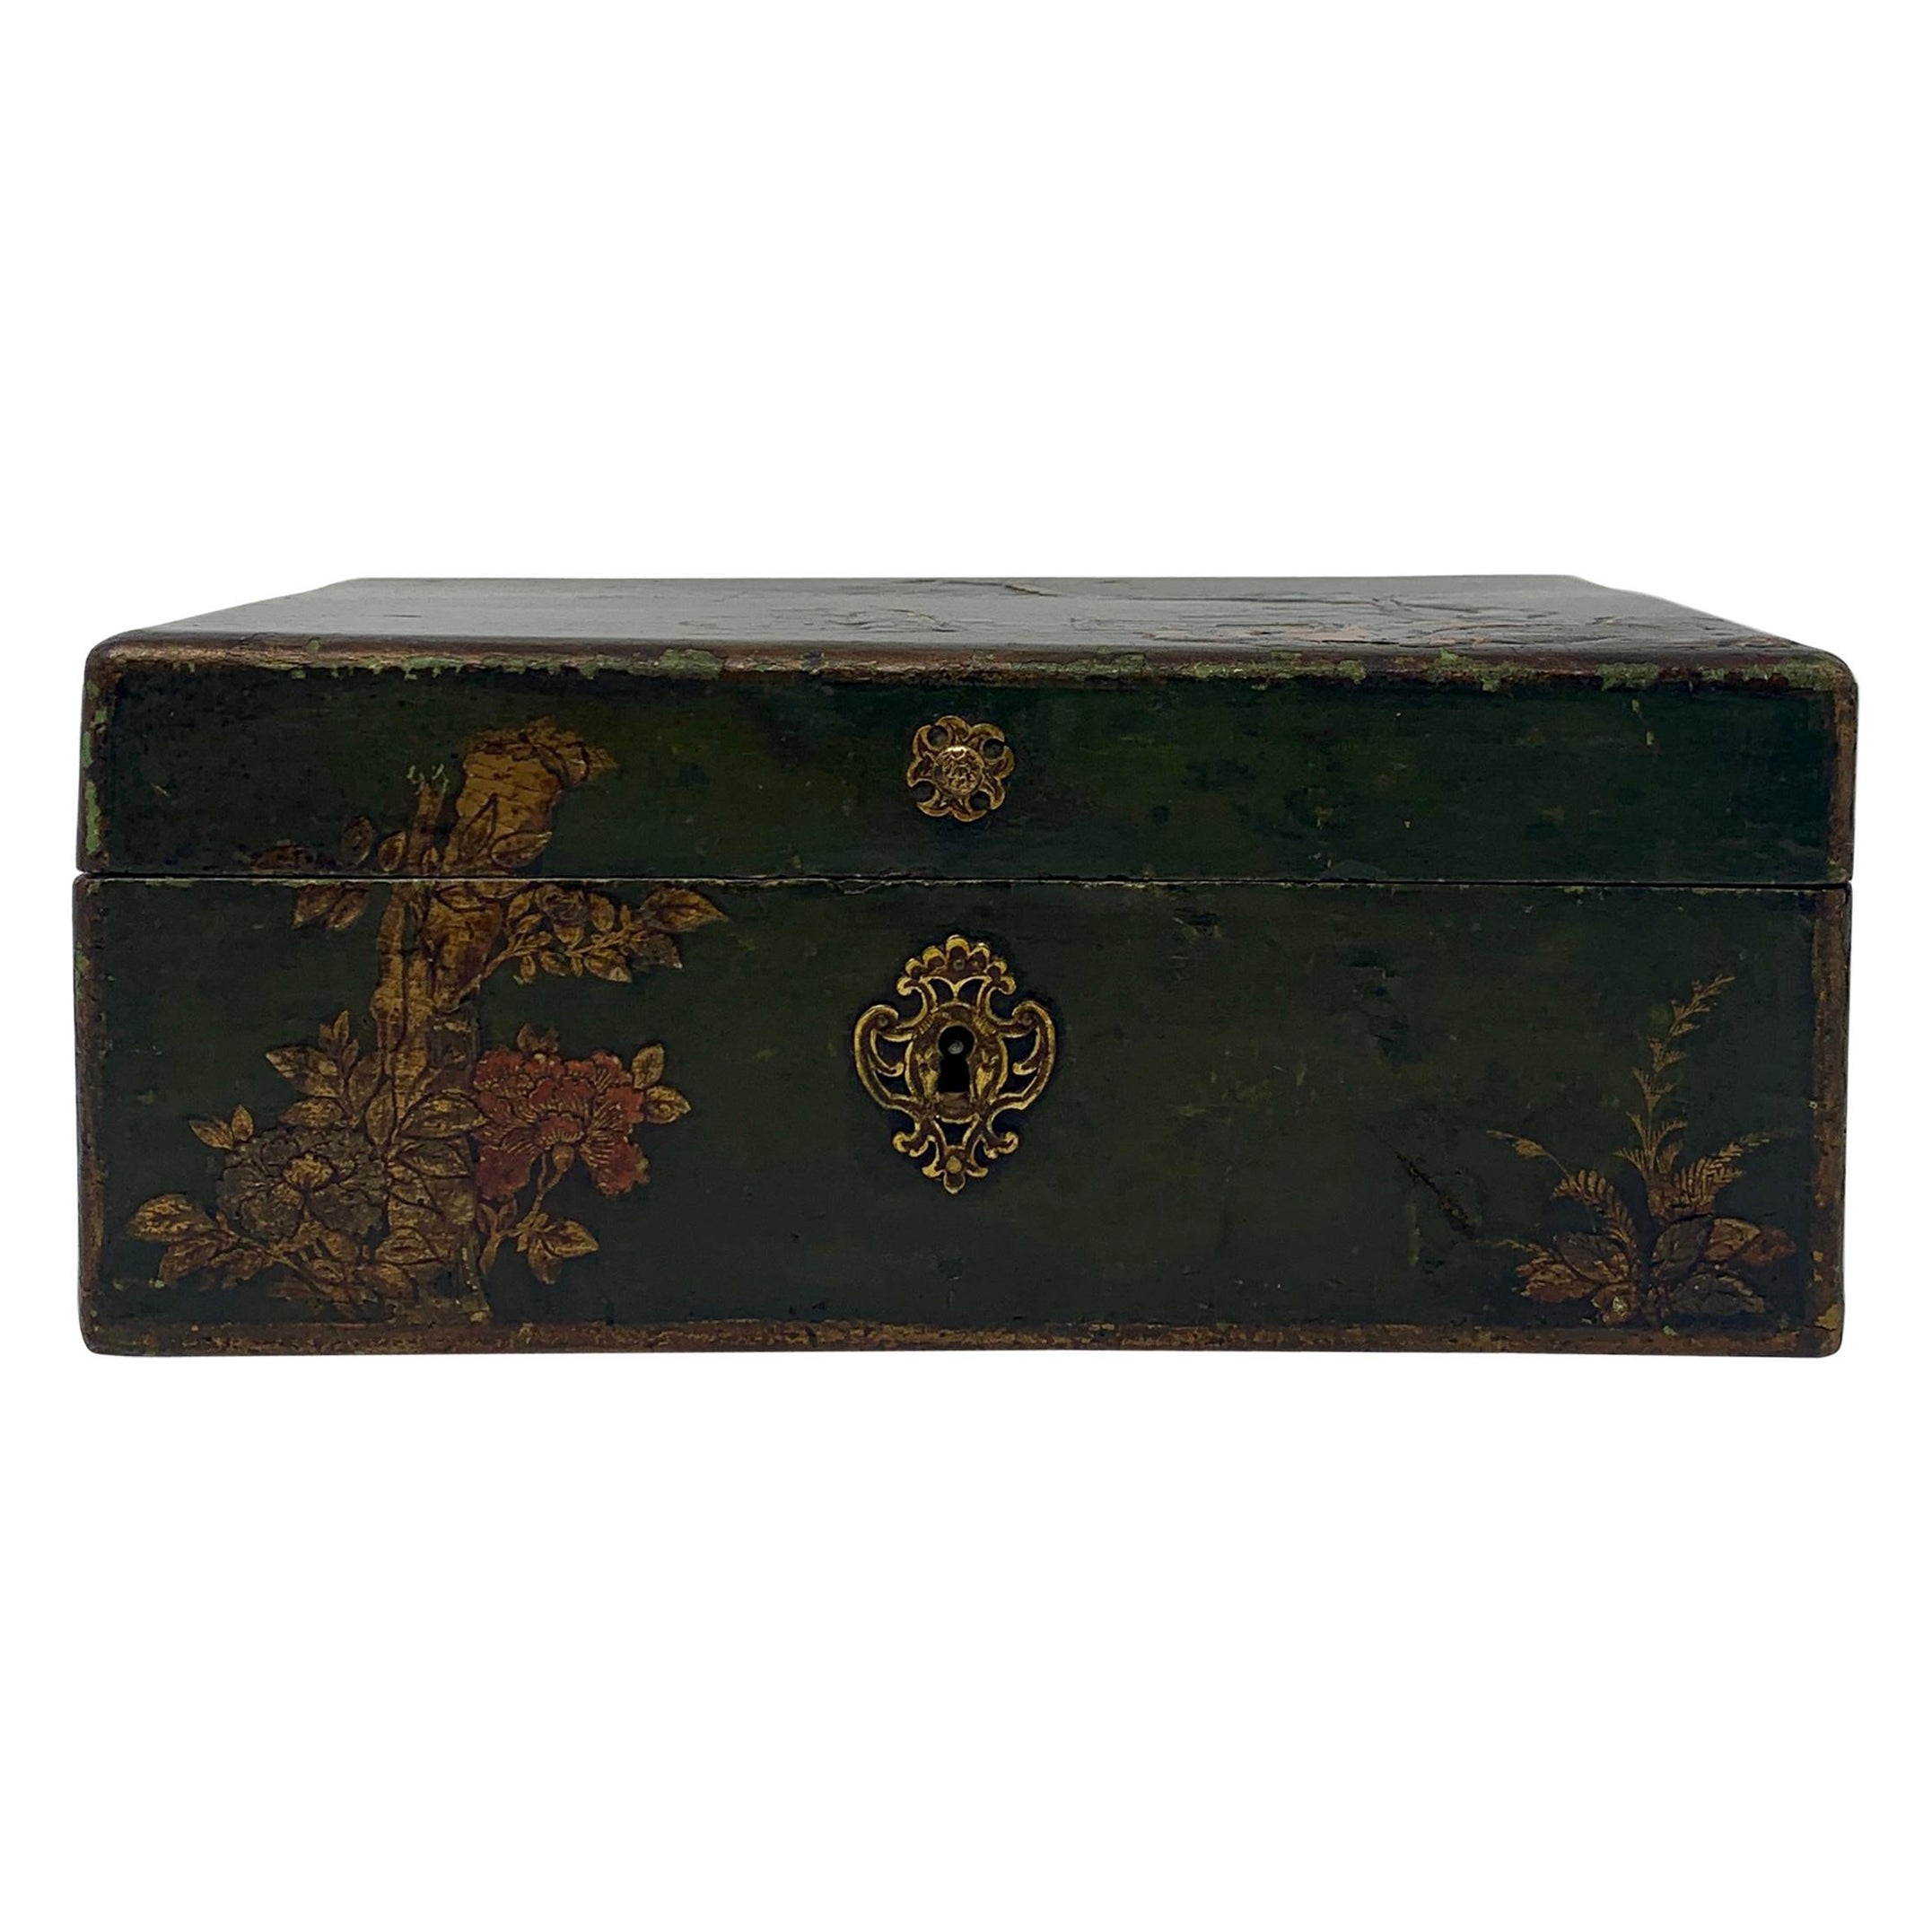 Antique Chinoiserie Painted Wood Jewel Box